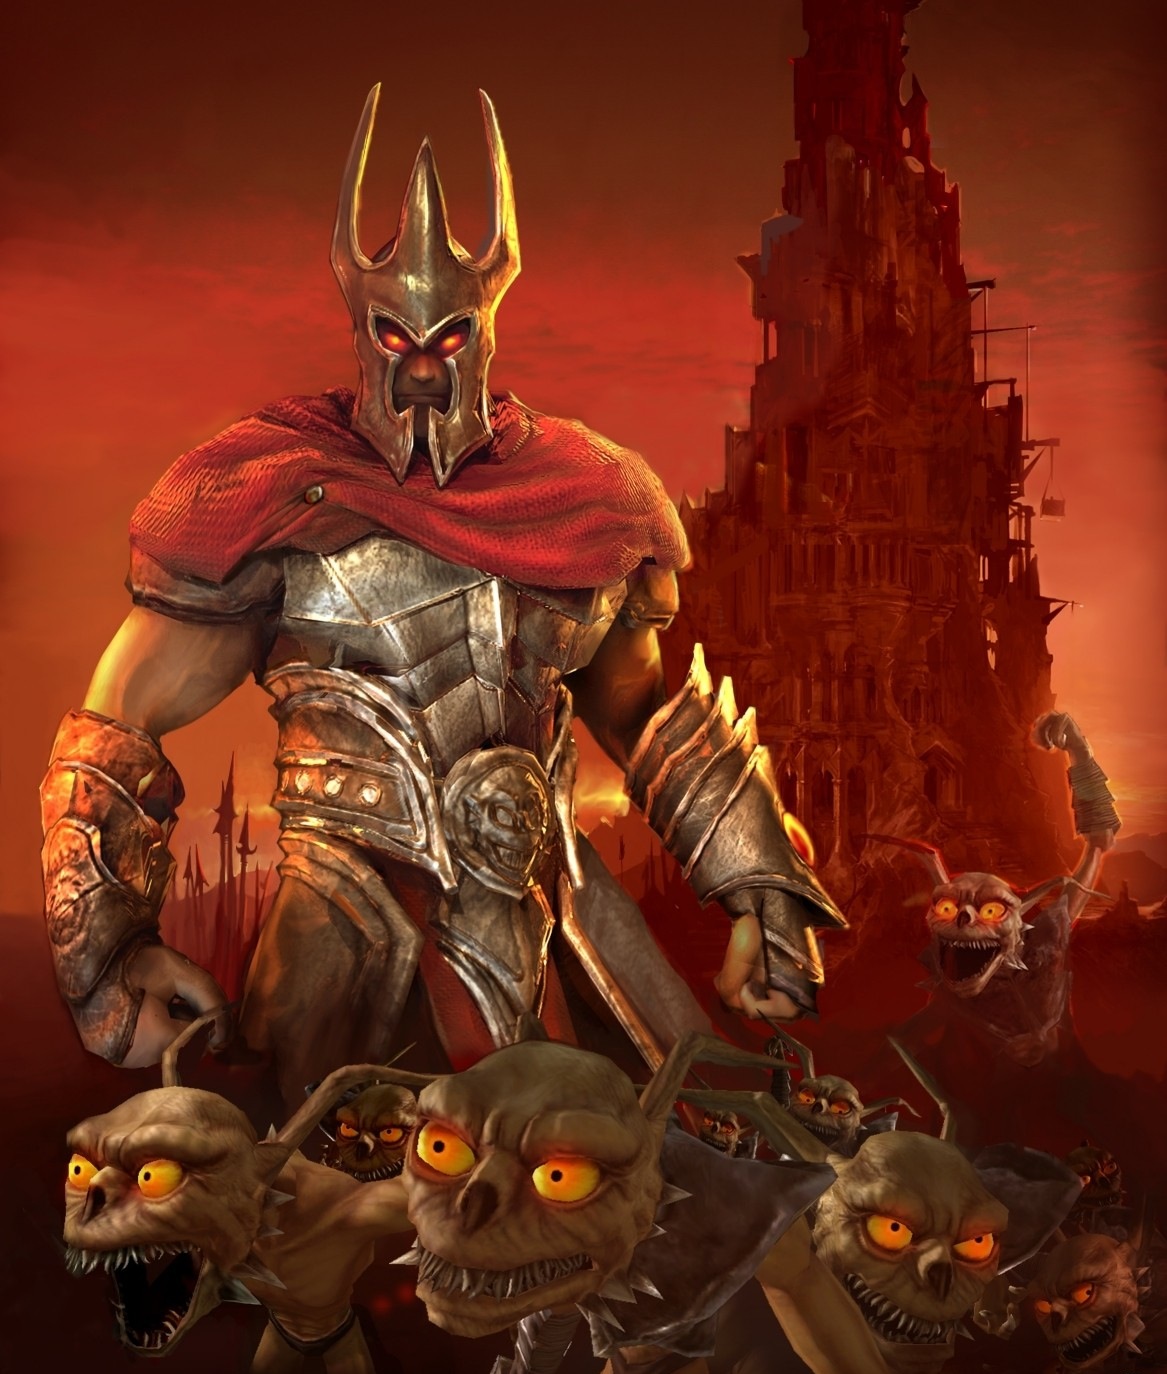 Overlord (2007 video game) - Wikipedia